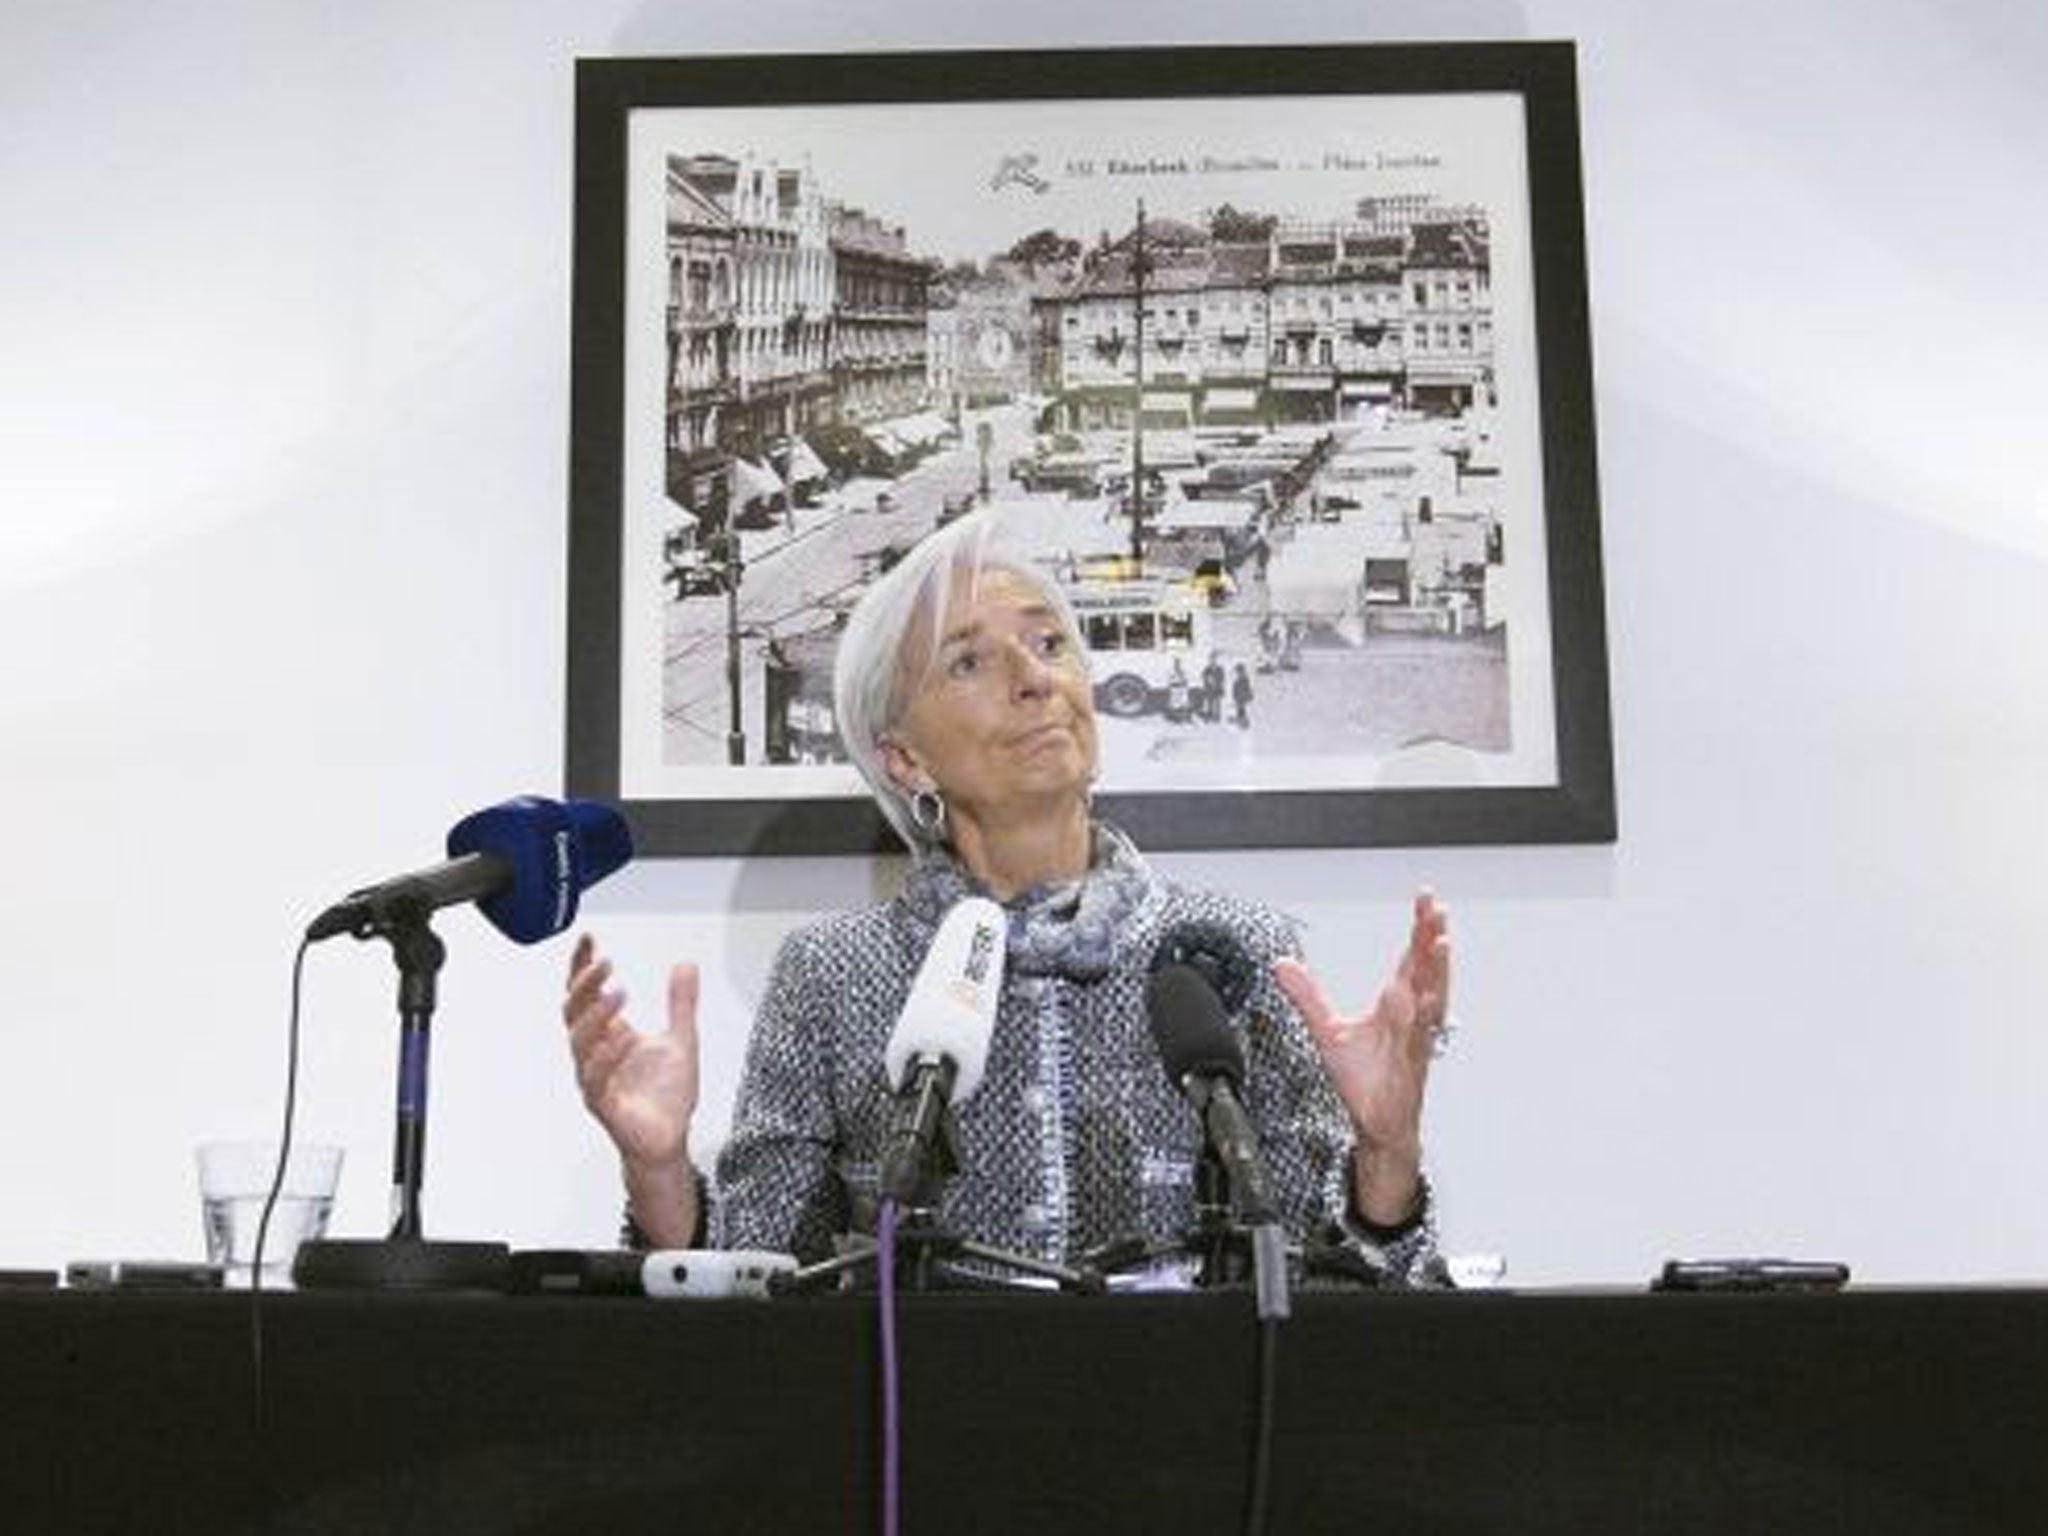 IMF managing director Christine Lagarde speaks about the situation in Ukraine at a news conference in Brussels